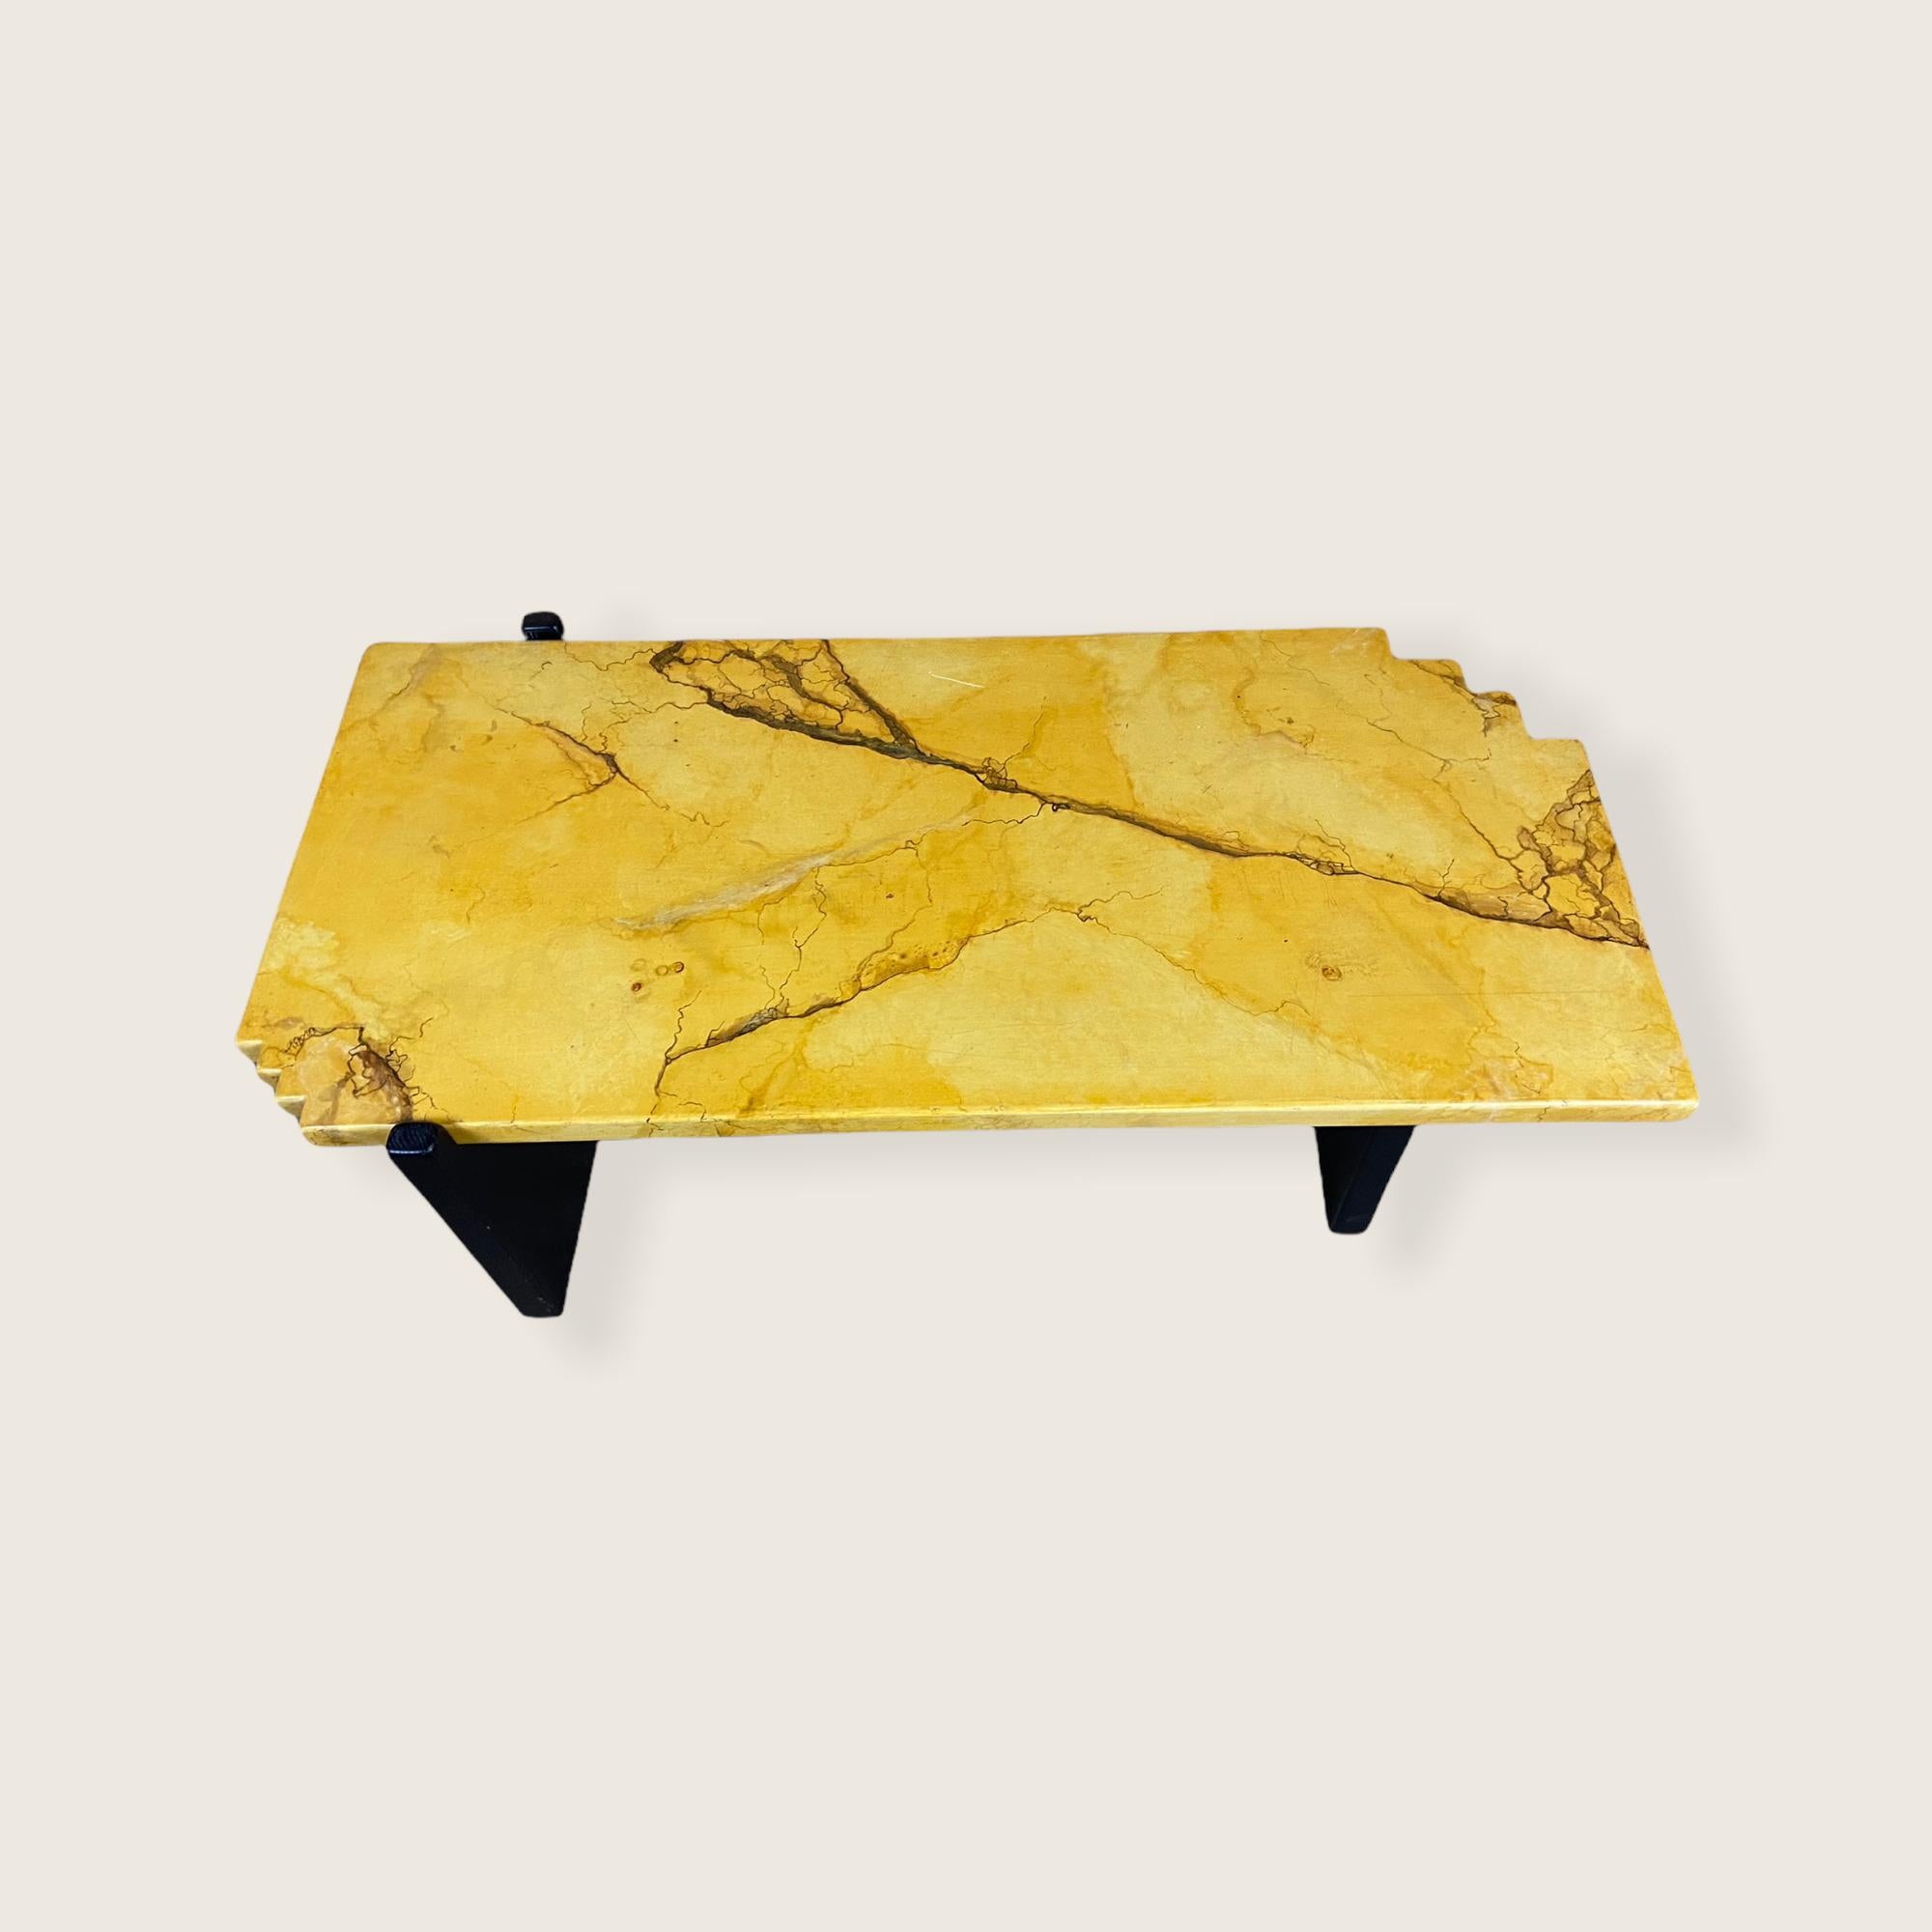 Art Deco coffee table made of solid oak with a yellow marbled top. The table legs are black and they are dismountable. Unique piece of furniture made to order in The Netherlands.This object is in a good condition but it shows sign of age.